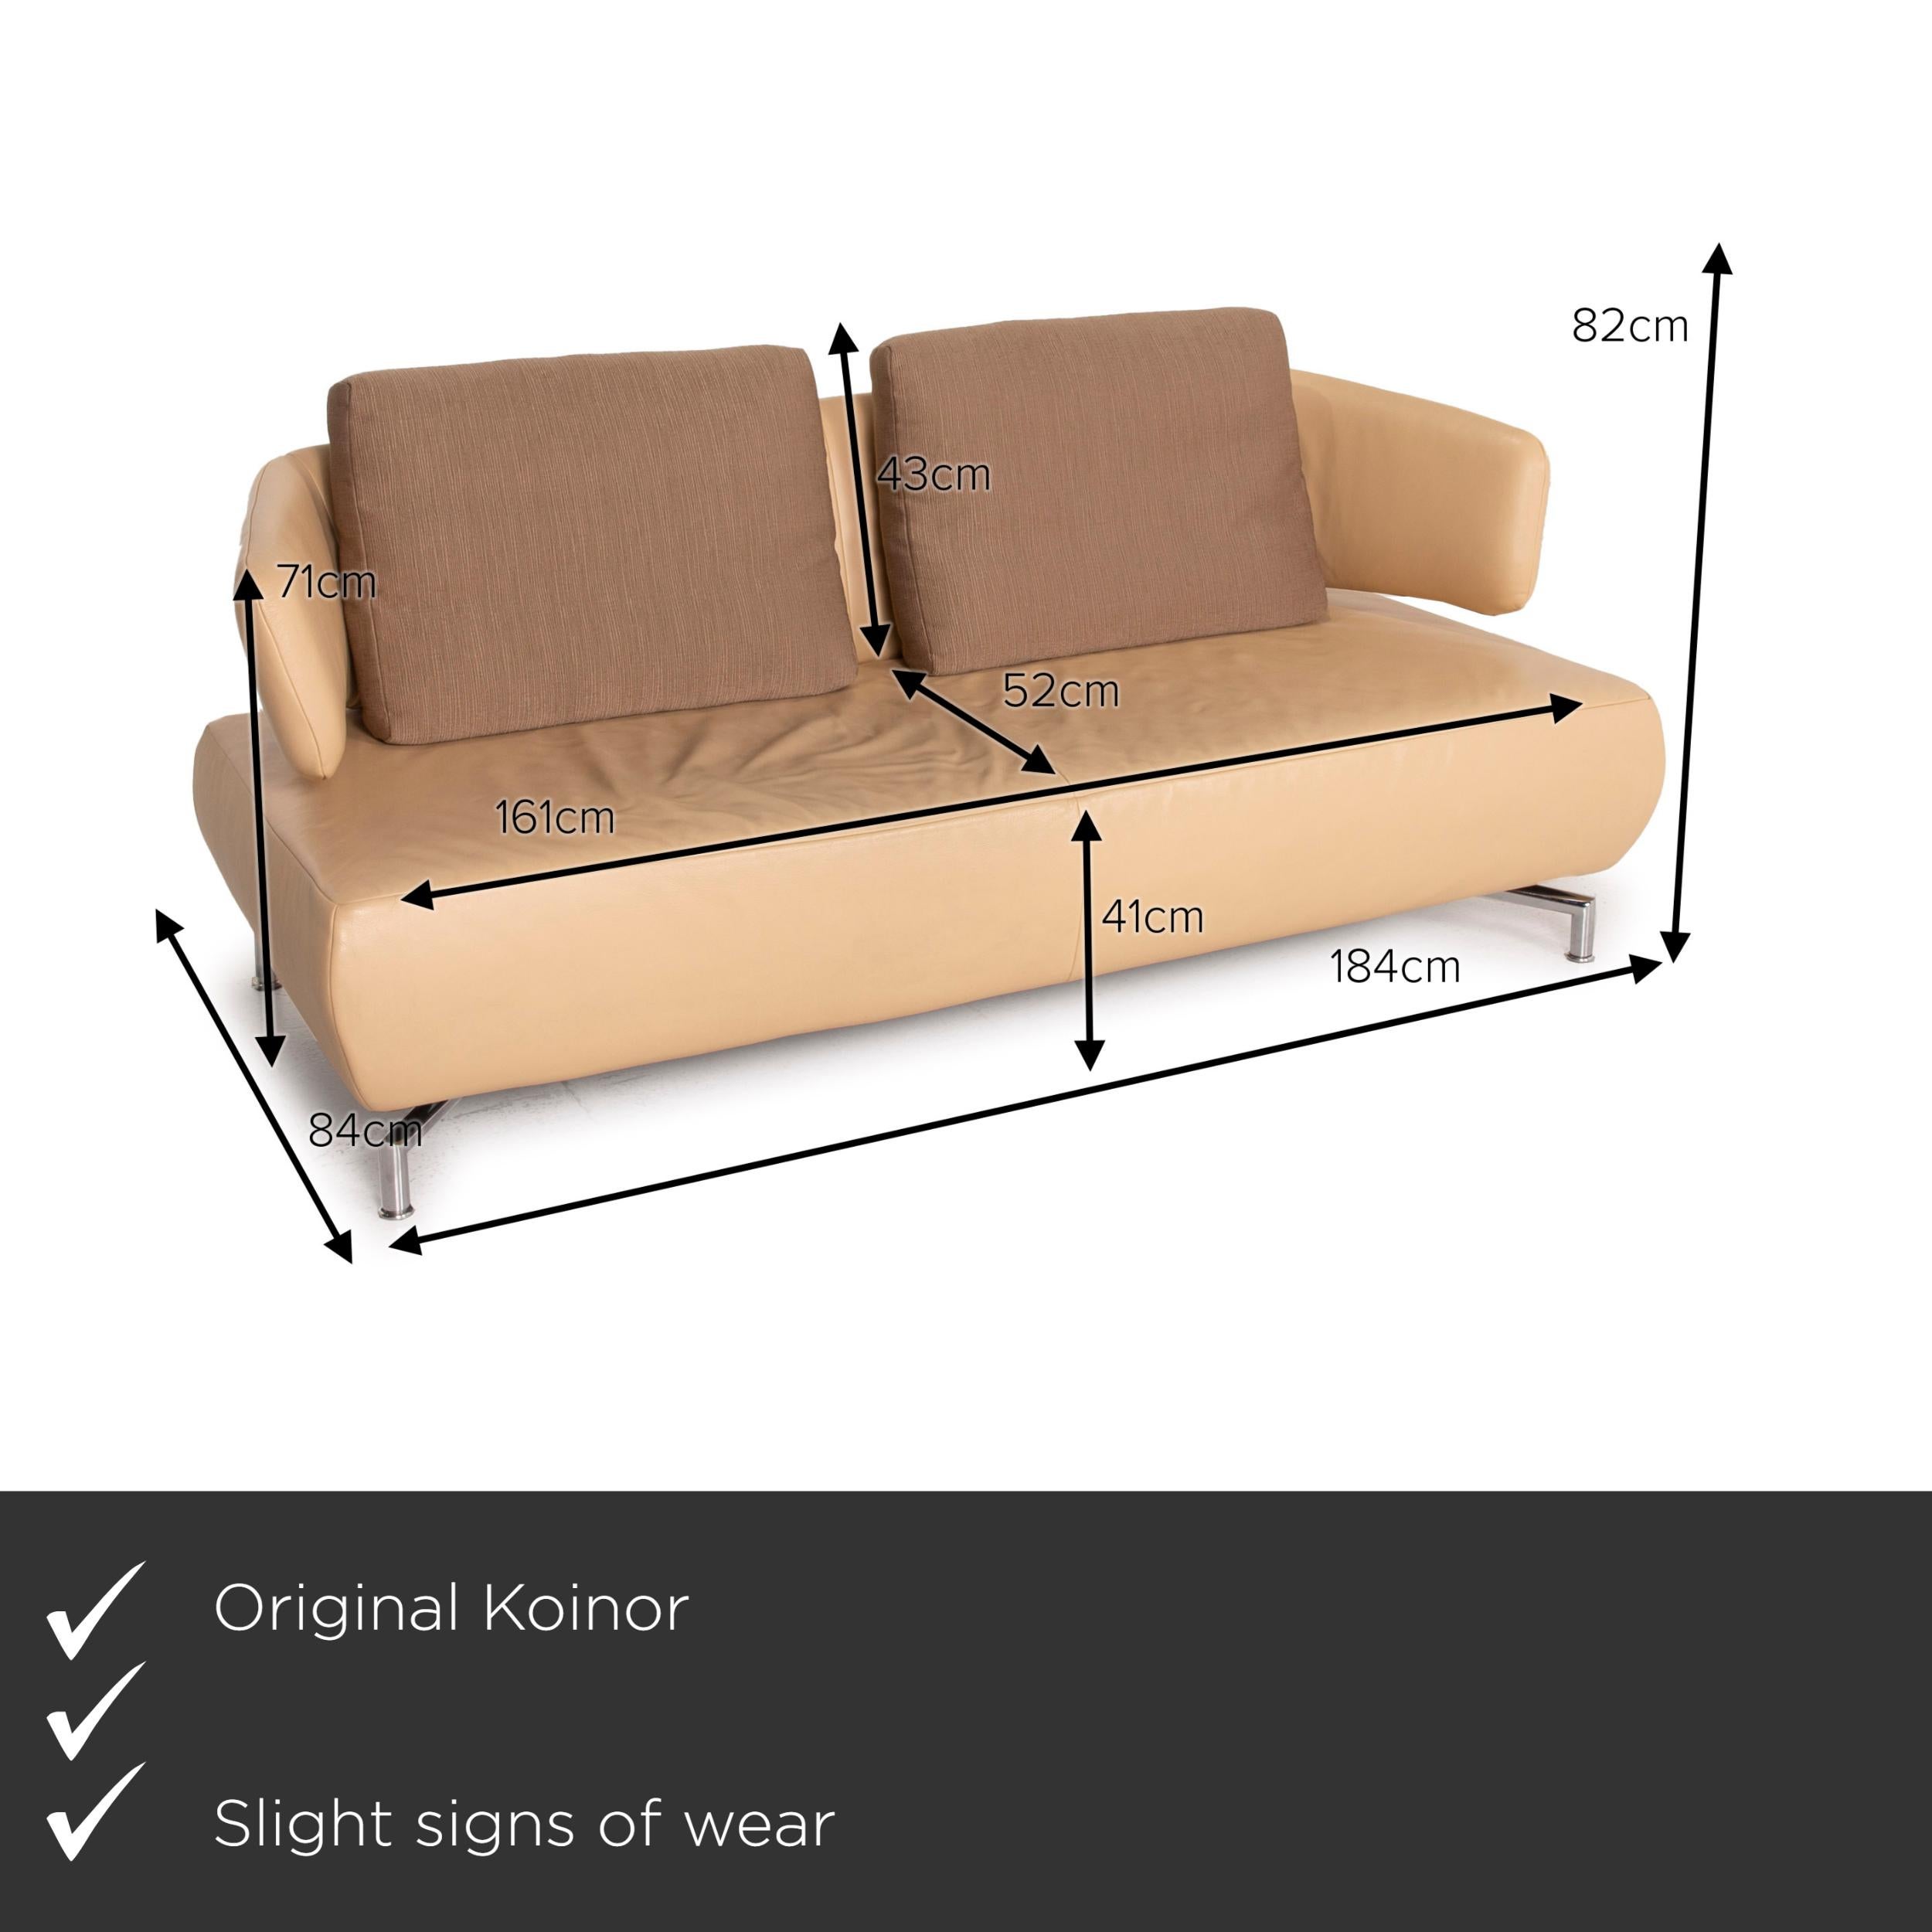 We present to you a Koinor leather sofa beige two-seater fabric.
  
 

 Product measurements in centimeters:
 

Depth: 84
Width: 184
Height: 82
Seat height: 41
Rest height: 71
Seat depth: 52
Seat width: 161
Back height: 43.